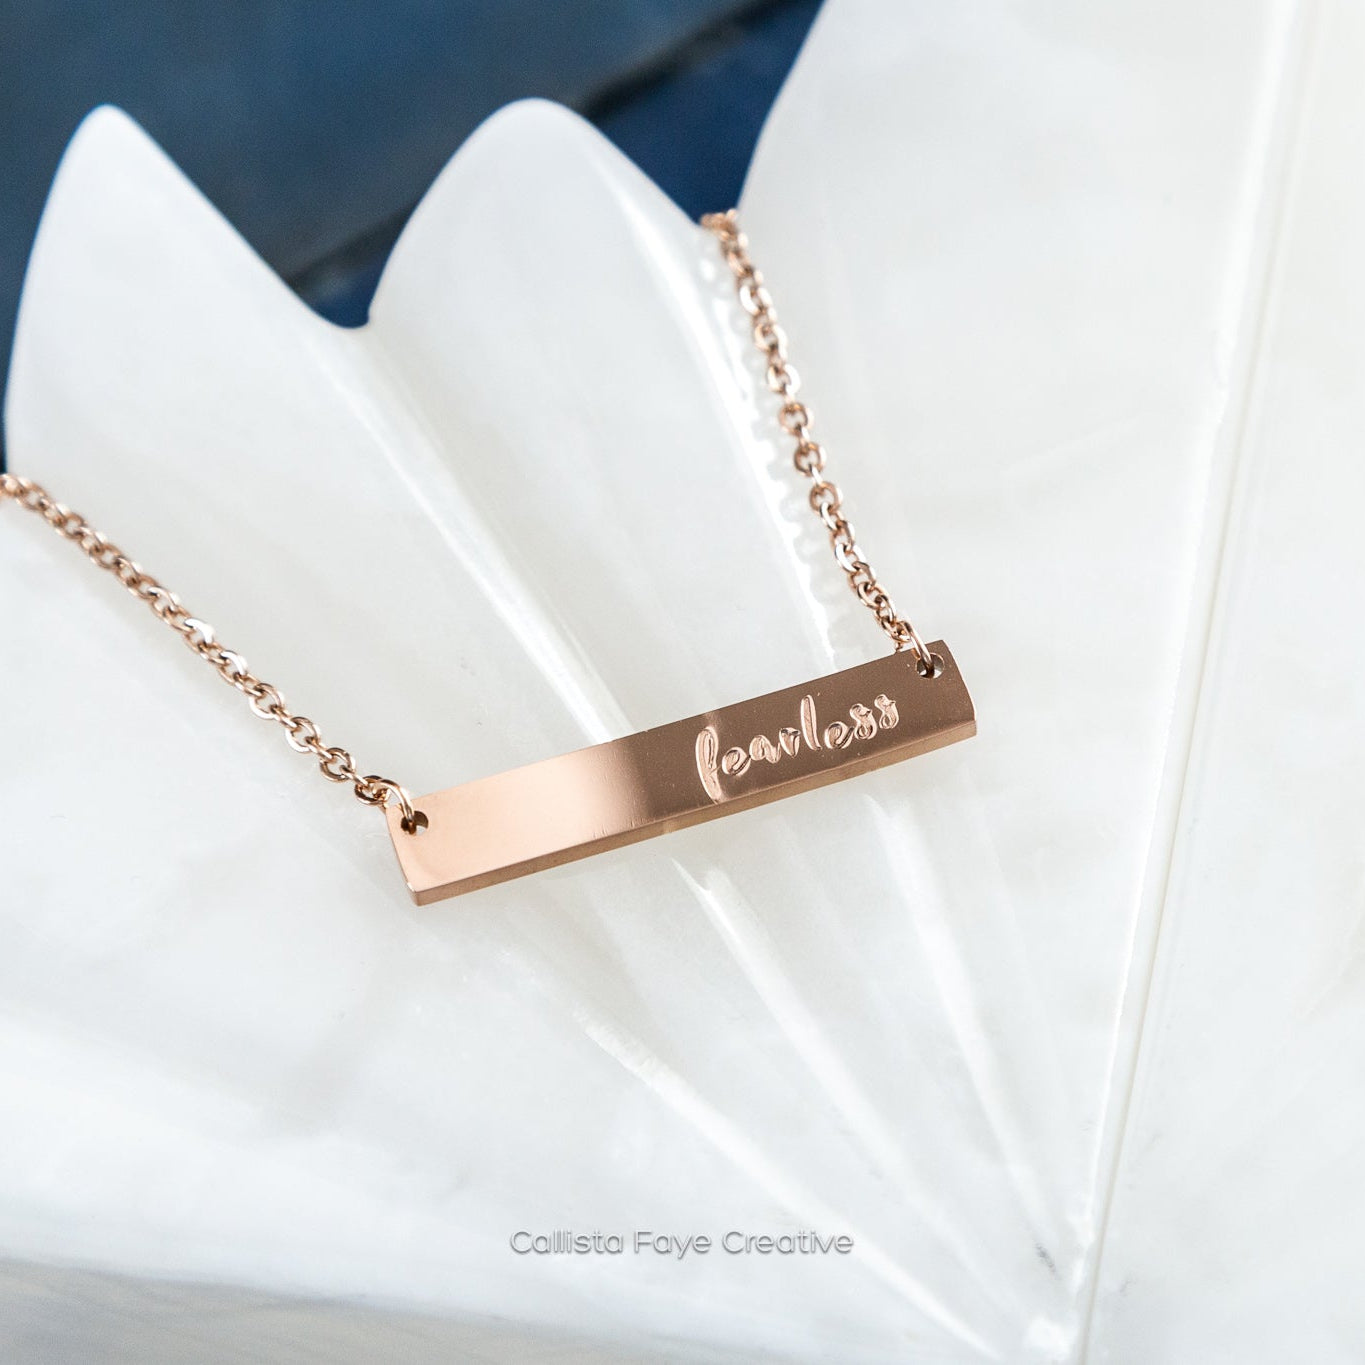 Fearless, Hand Stamped Bar Affirmation Necklace Necklaces callistafaye   